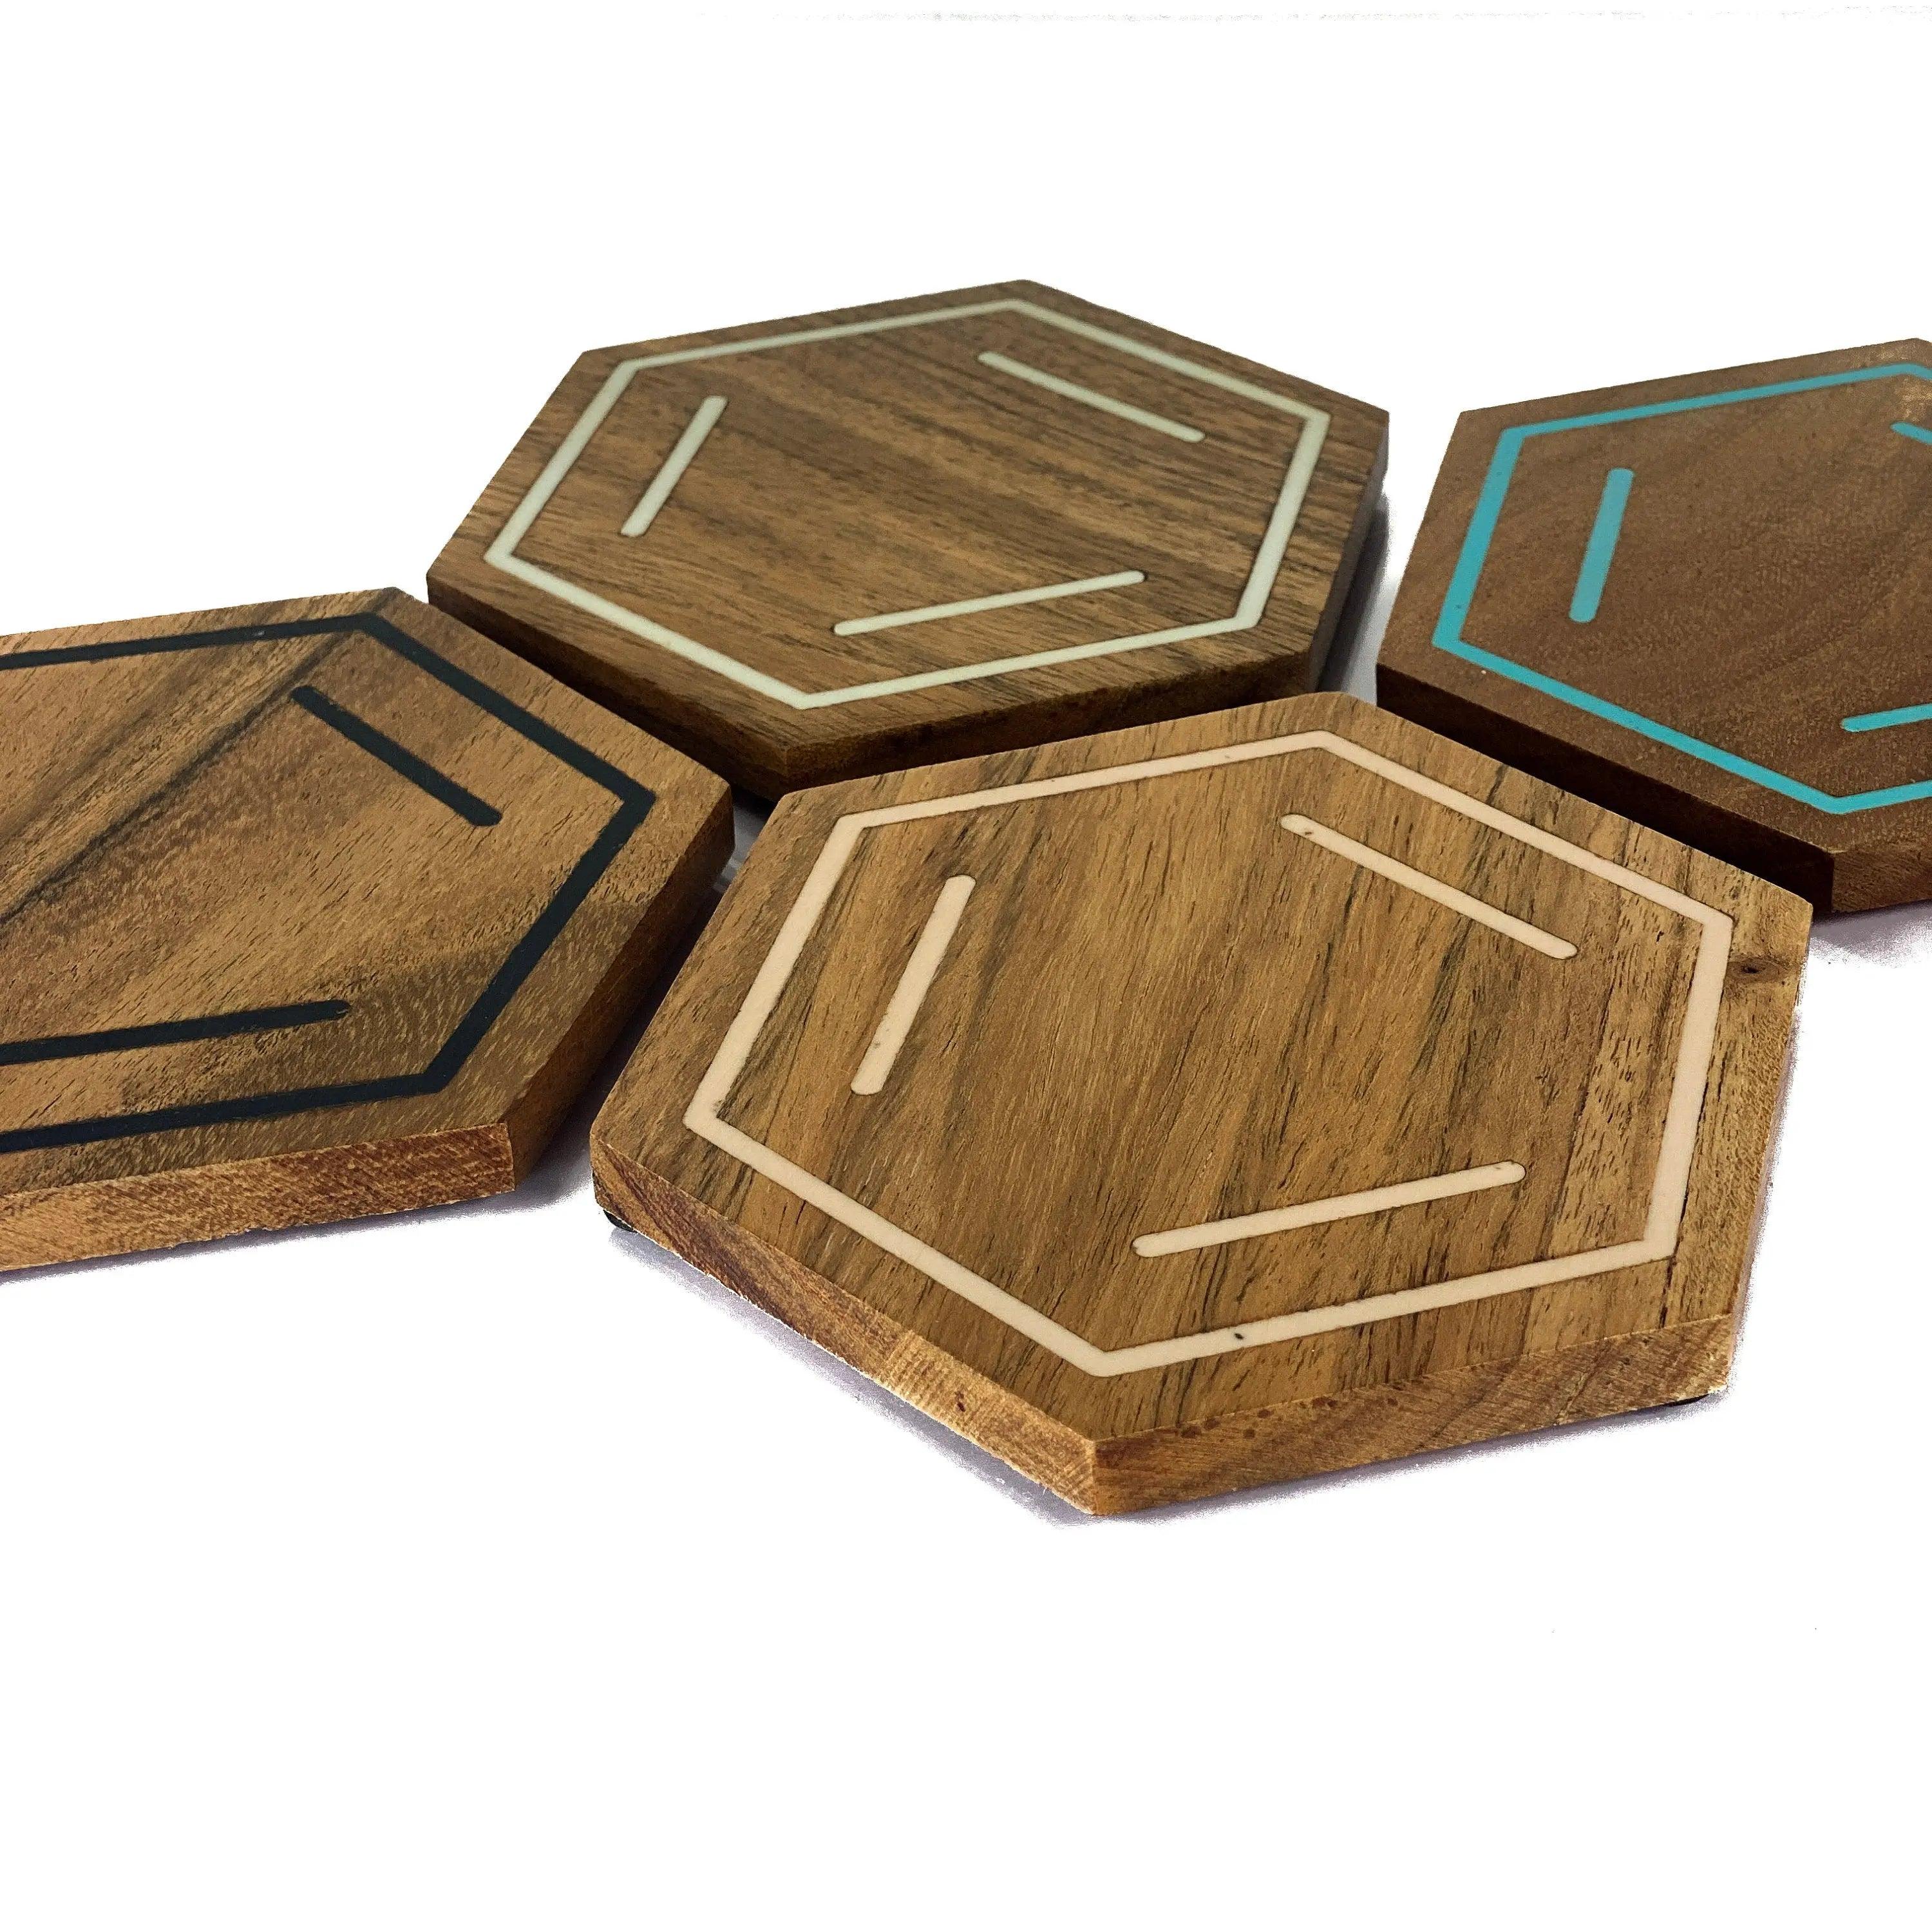 Natural Wood and Resin Chemistry Coaster Set of 4 | Science and Chemistry Gifts